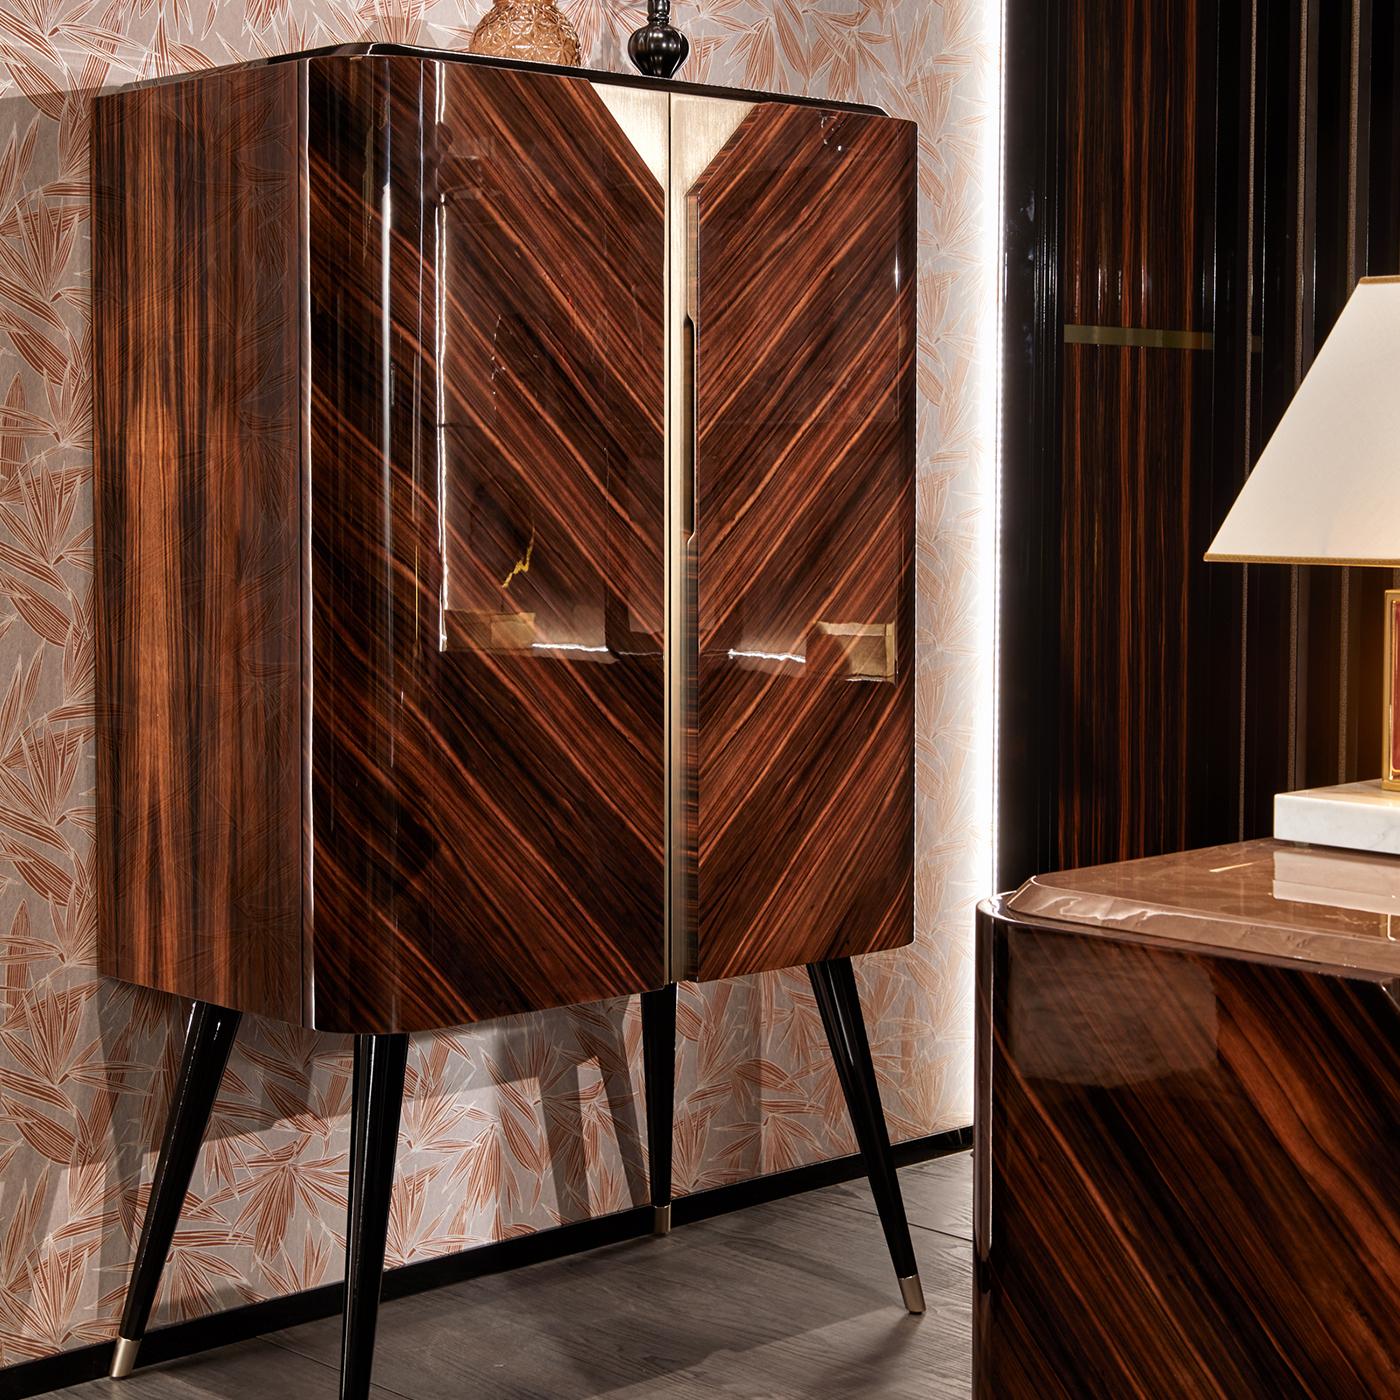 Testament to the beauty of natural wood, the Brent Bar Cabinet is made in stunning Macassar ebony, with carefully placed panels that exalt the wood's veins. Standing on flared legs inspired by Mid-Century Modern designs, the bar cabinet with a